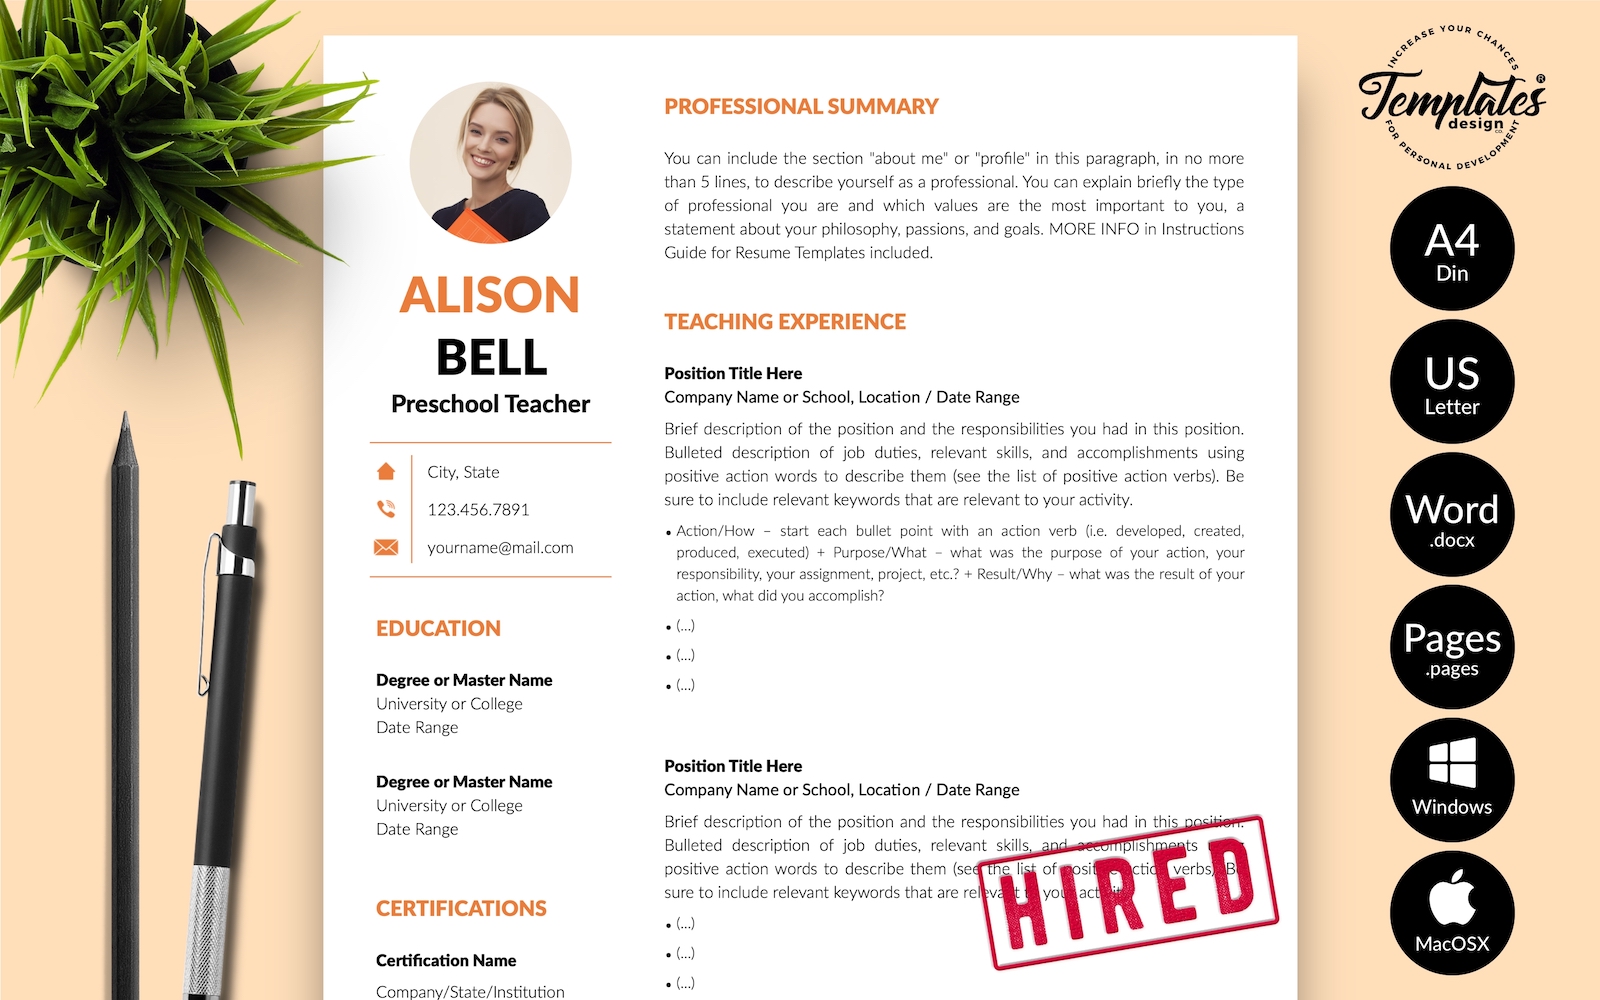 Alison Bell - Teacher CV Resume Template with Cover Letter for Microsoft Word & iWork Pages